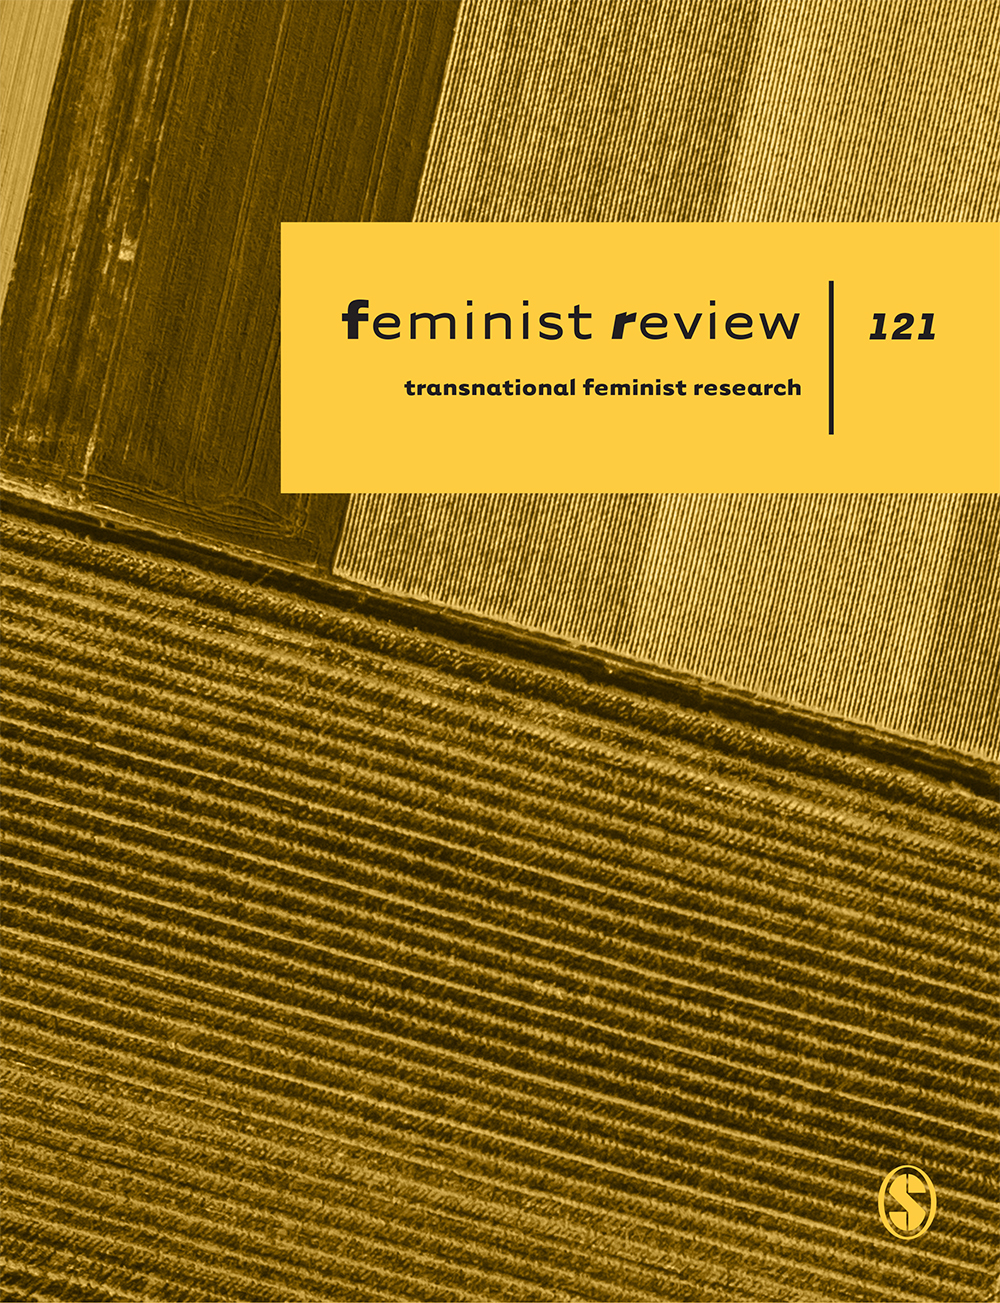 CFP: "Coloniality", special issue of Feminist Review.